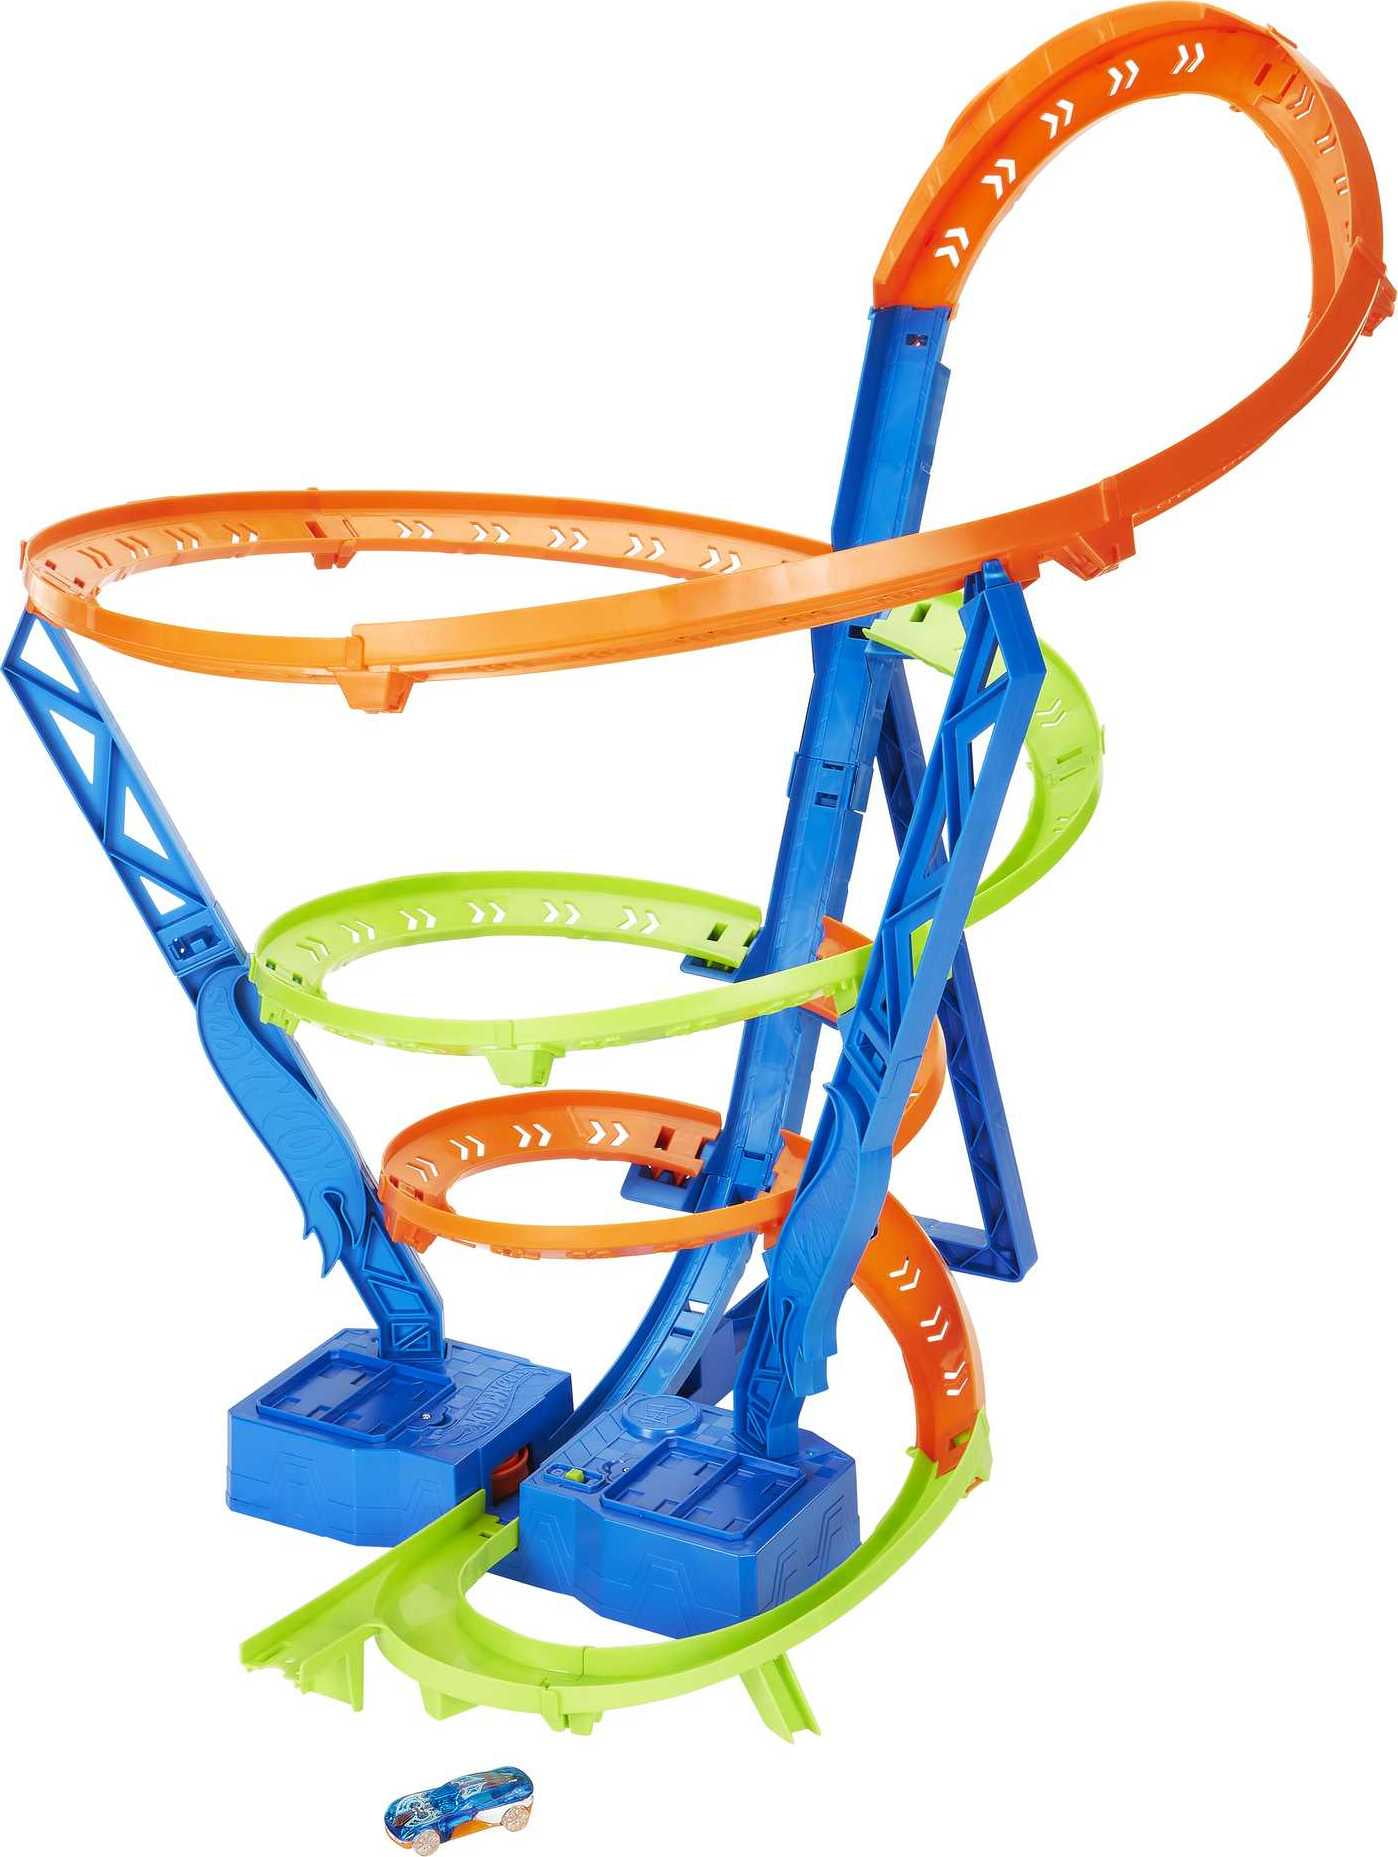 Hot Wheels Action Spiral Speed Crash Track Set With Motorized Booster